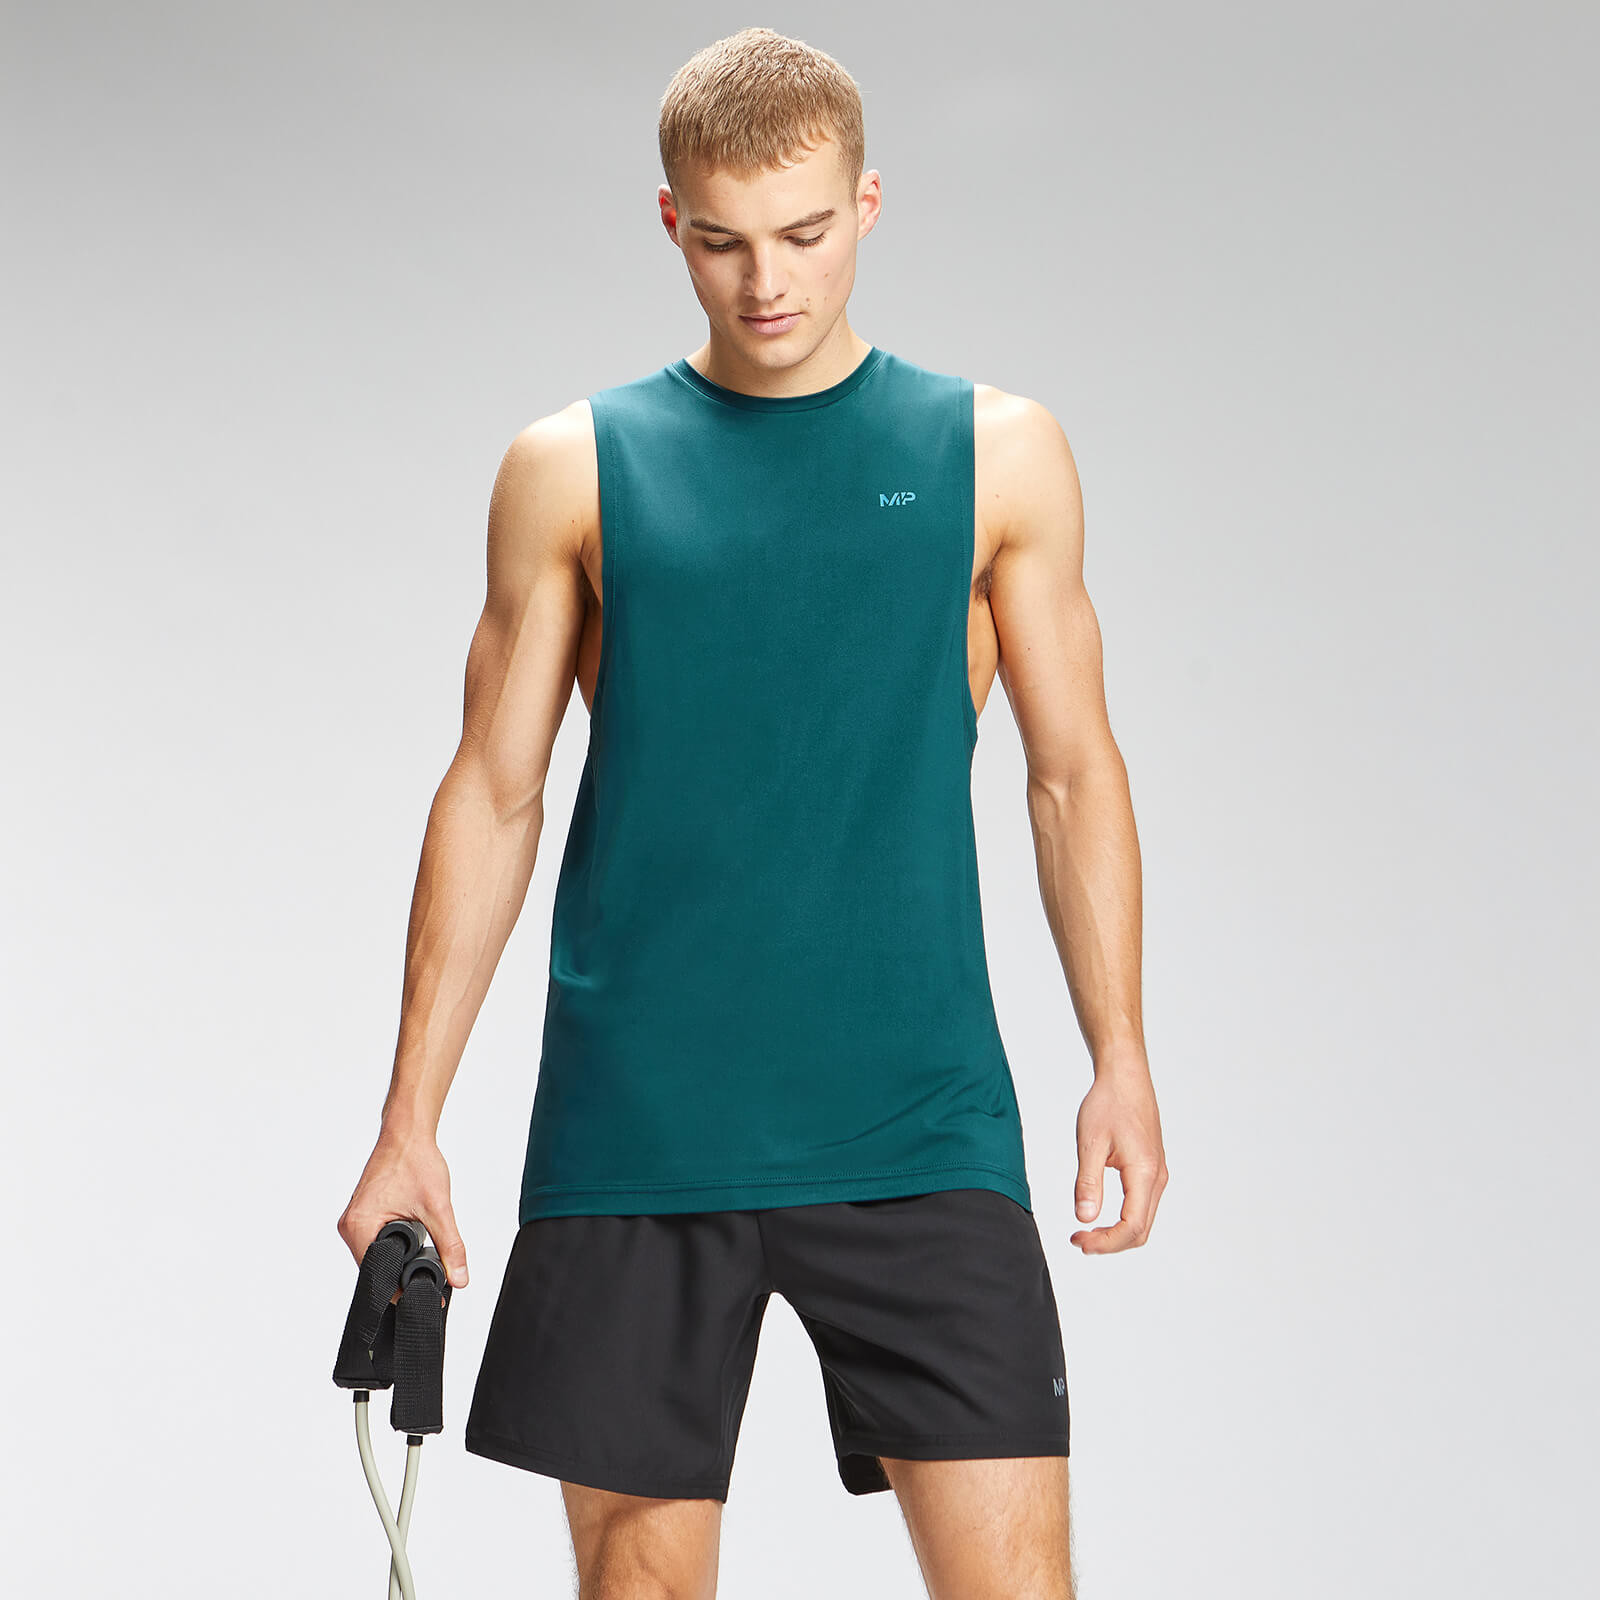 Repeat MP MP Men's Graphic Training Tank Top - Deep Teal - XS